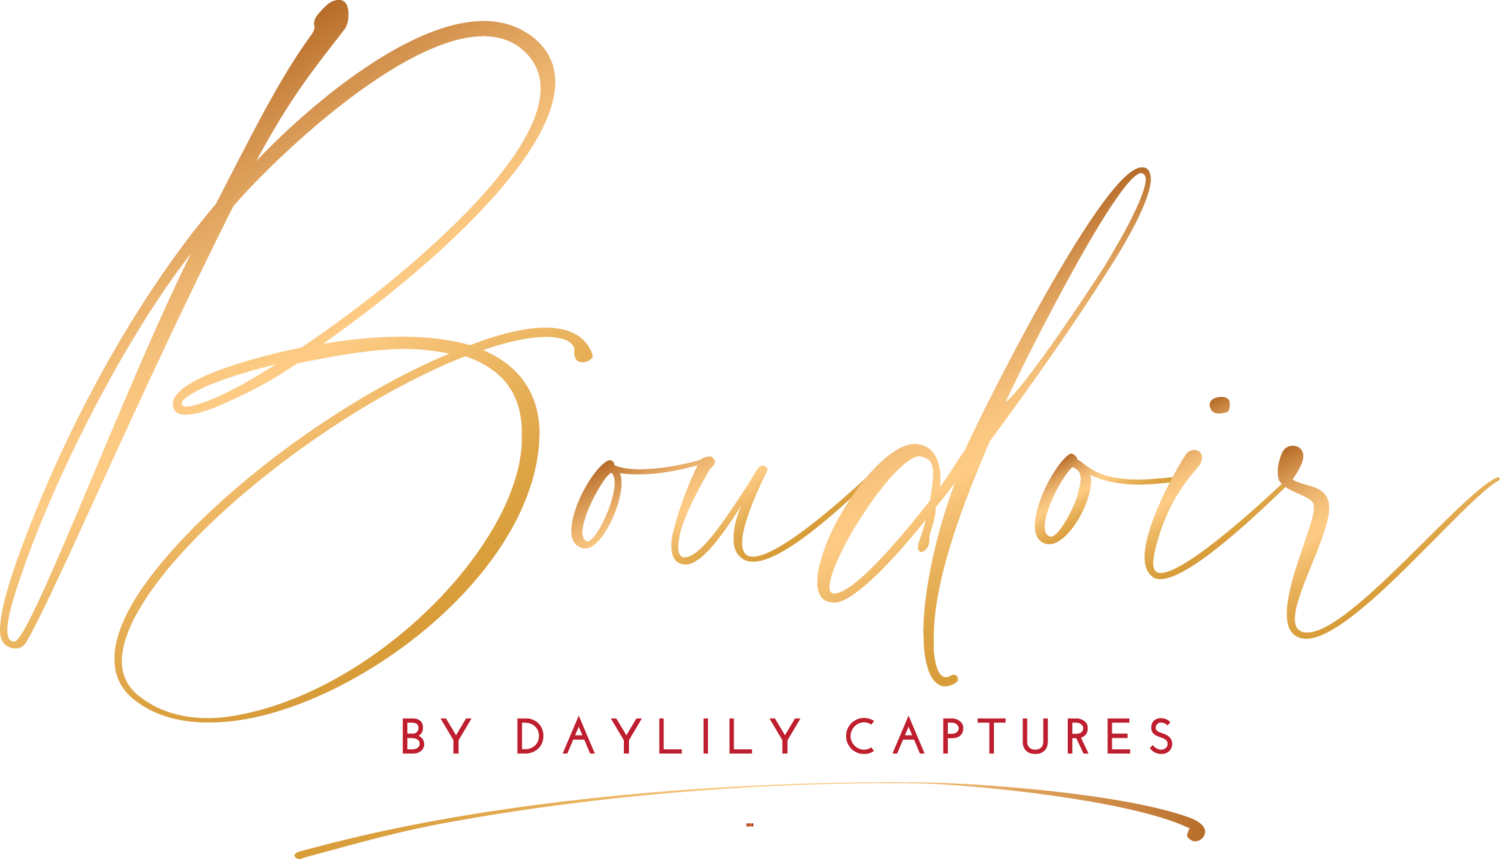 Boudoir by Daylily Captures